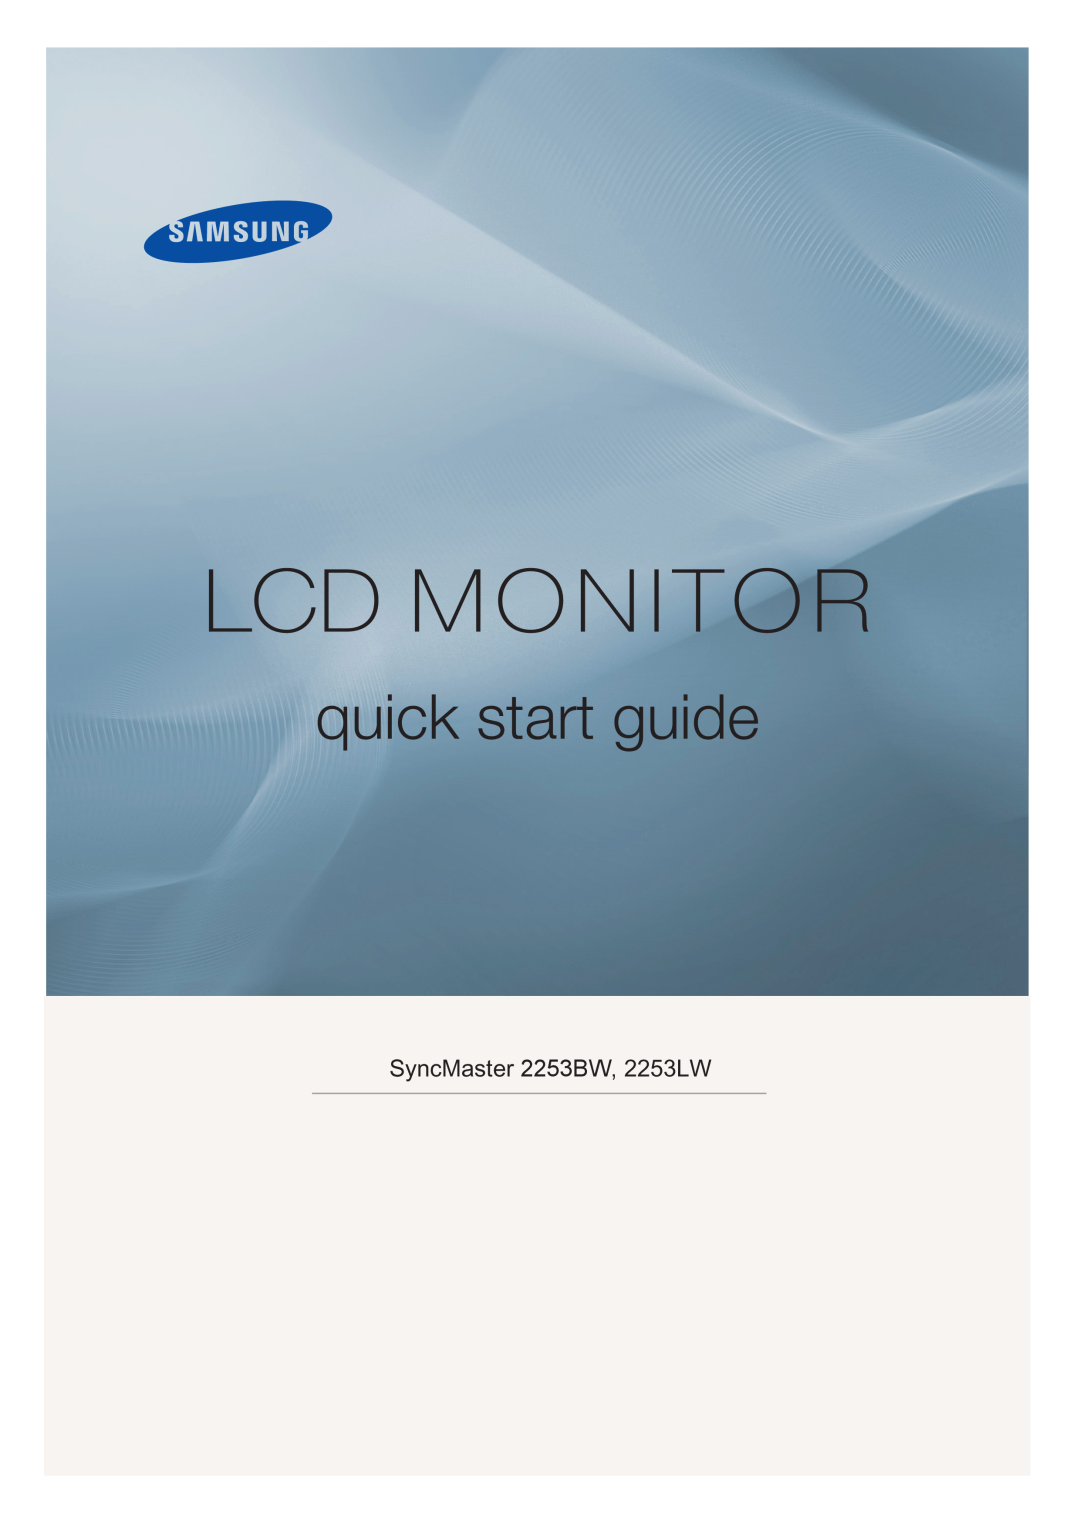 Samsung quick start Lcd Monitor, quick start guide, SyncMaster 2253BW, 2253LW 